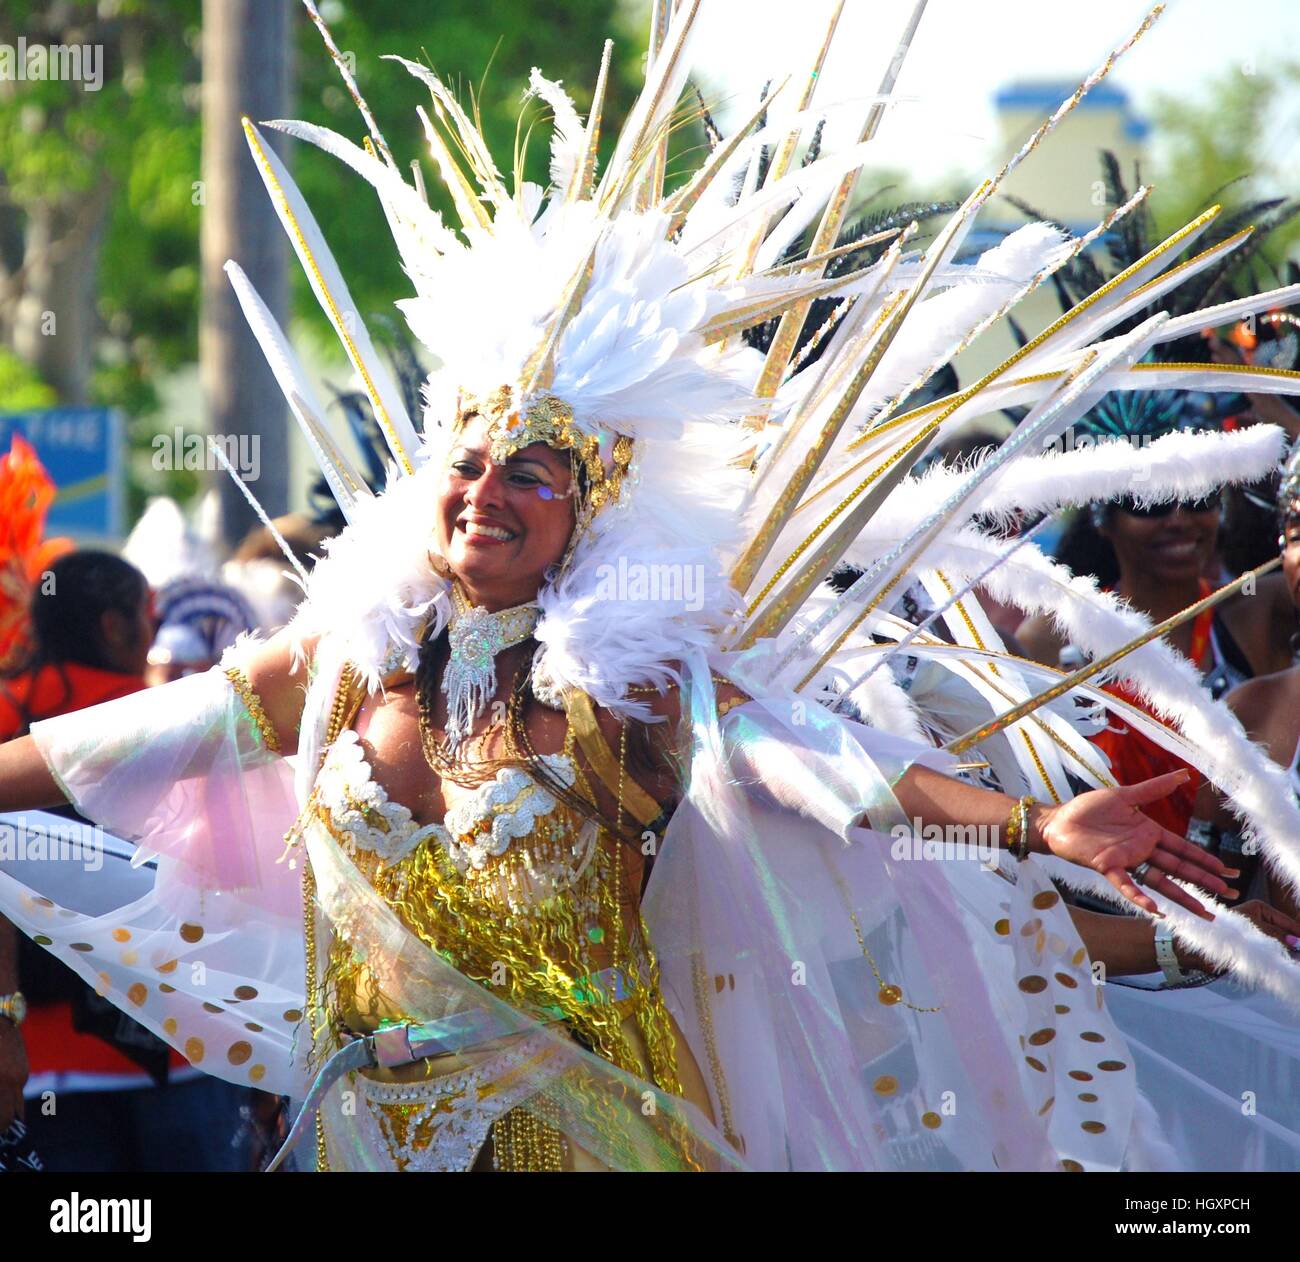 Carnival queen in white and gold costume Stock Photo - Alamy